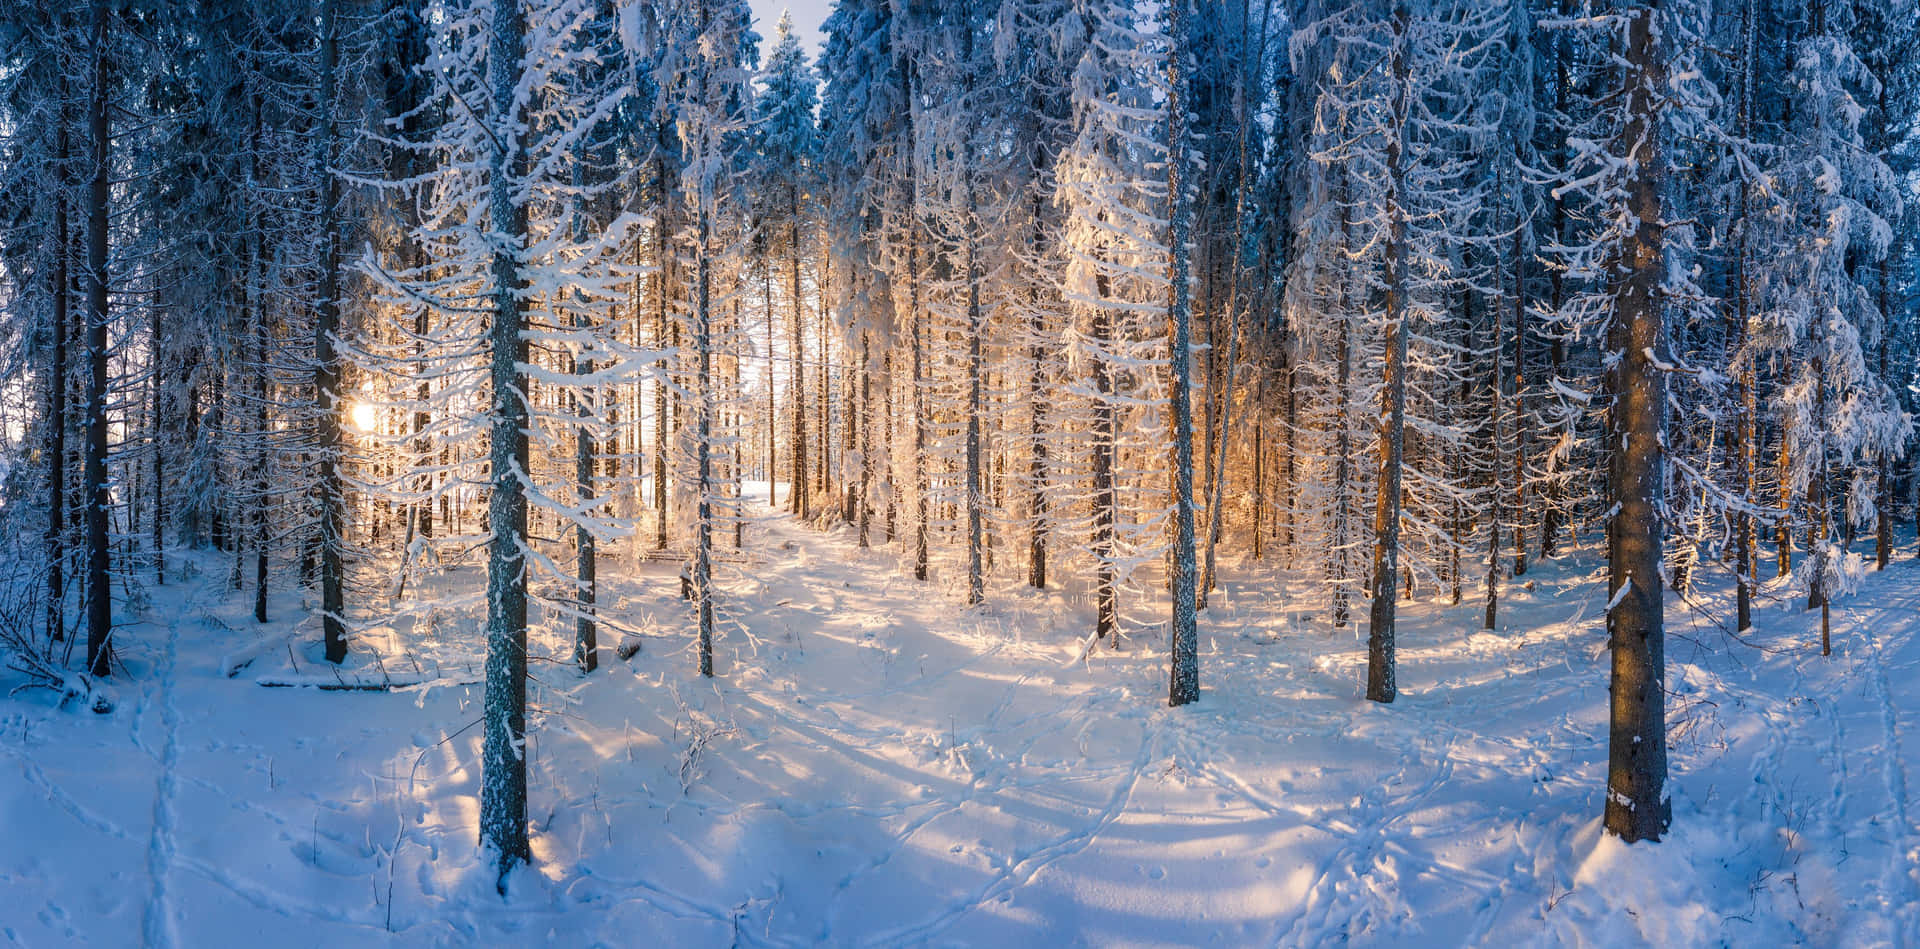 Explore the tranquil Winter Forest.